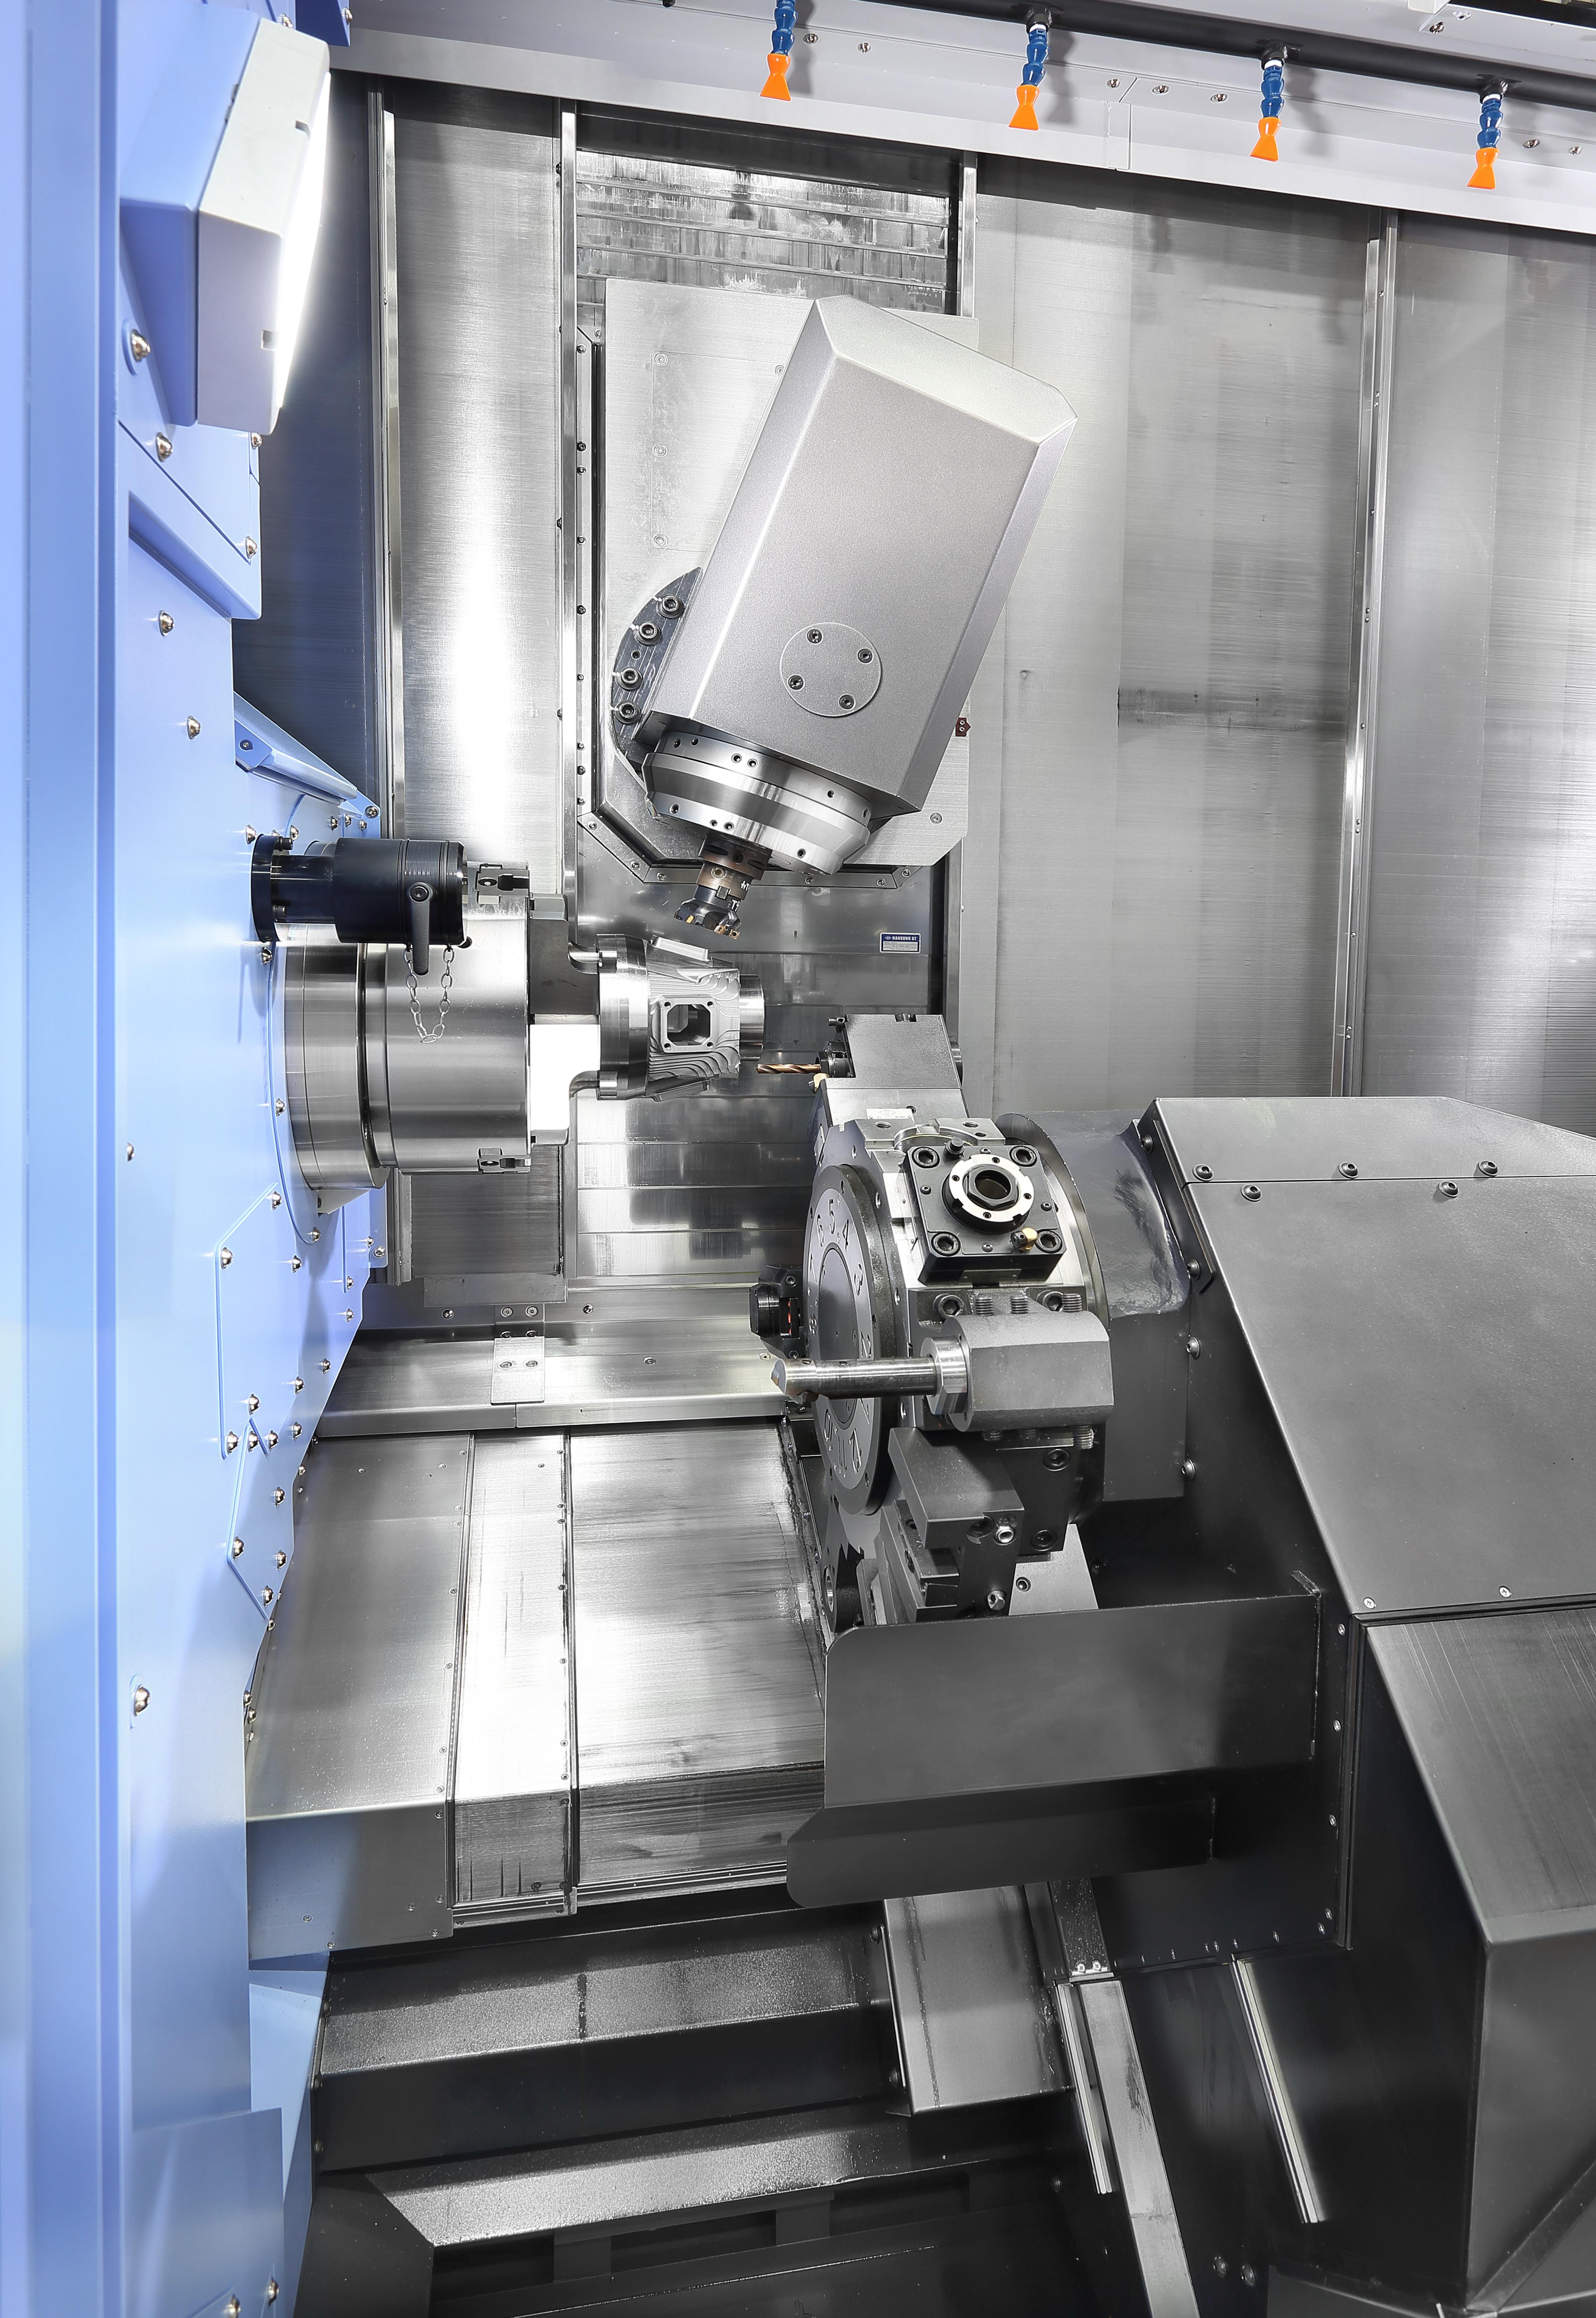 Doosan’s PUMA SMX2600ST multi-function mill turn center boasts nine axes, dual spindles and an ATC capacity of up to 120 tools. (Image courtesy of Doosan Machine Tools America)